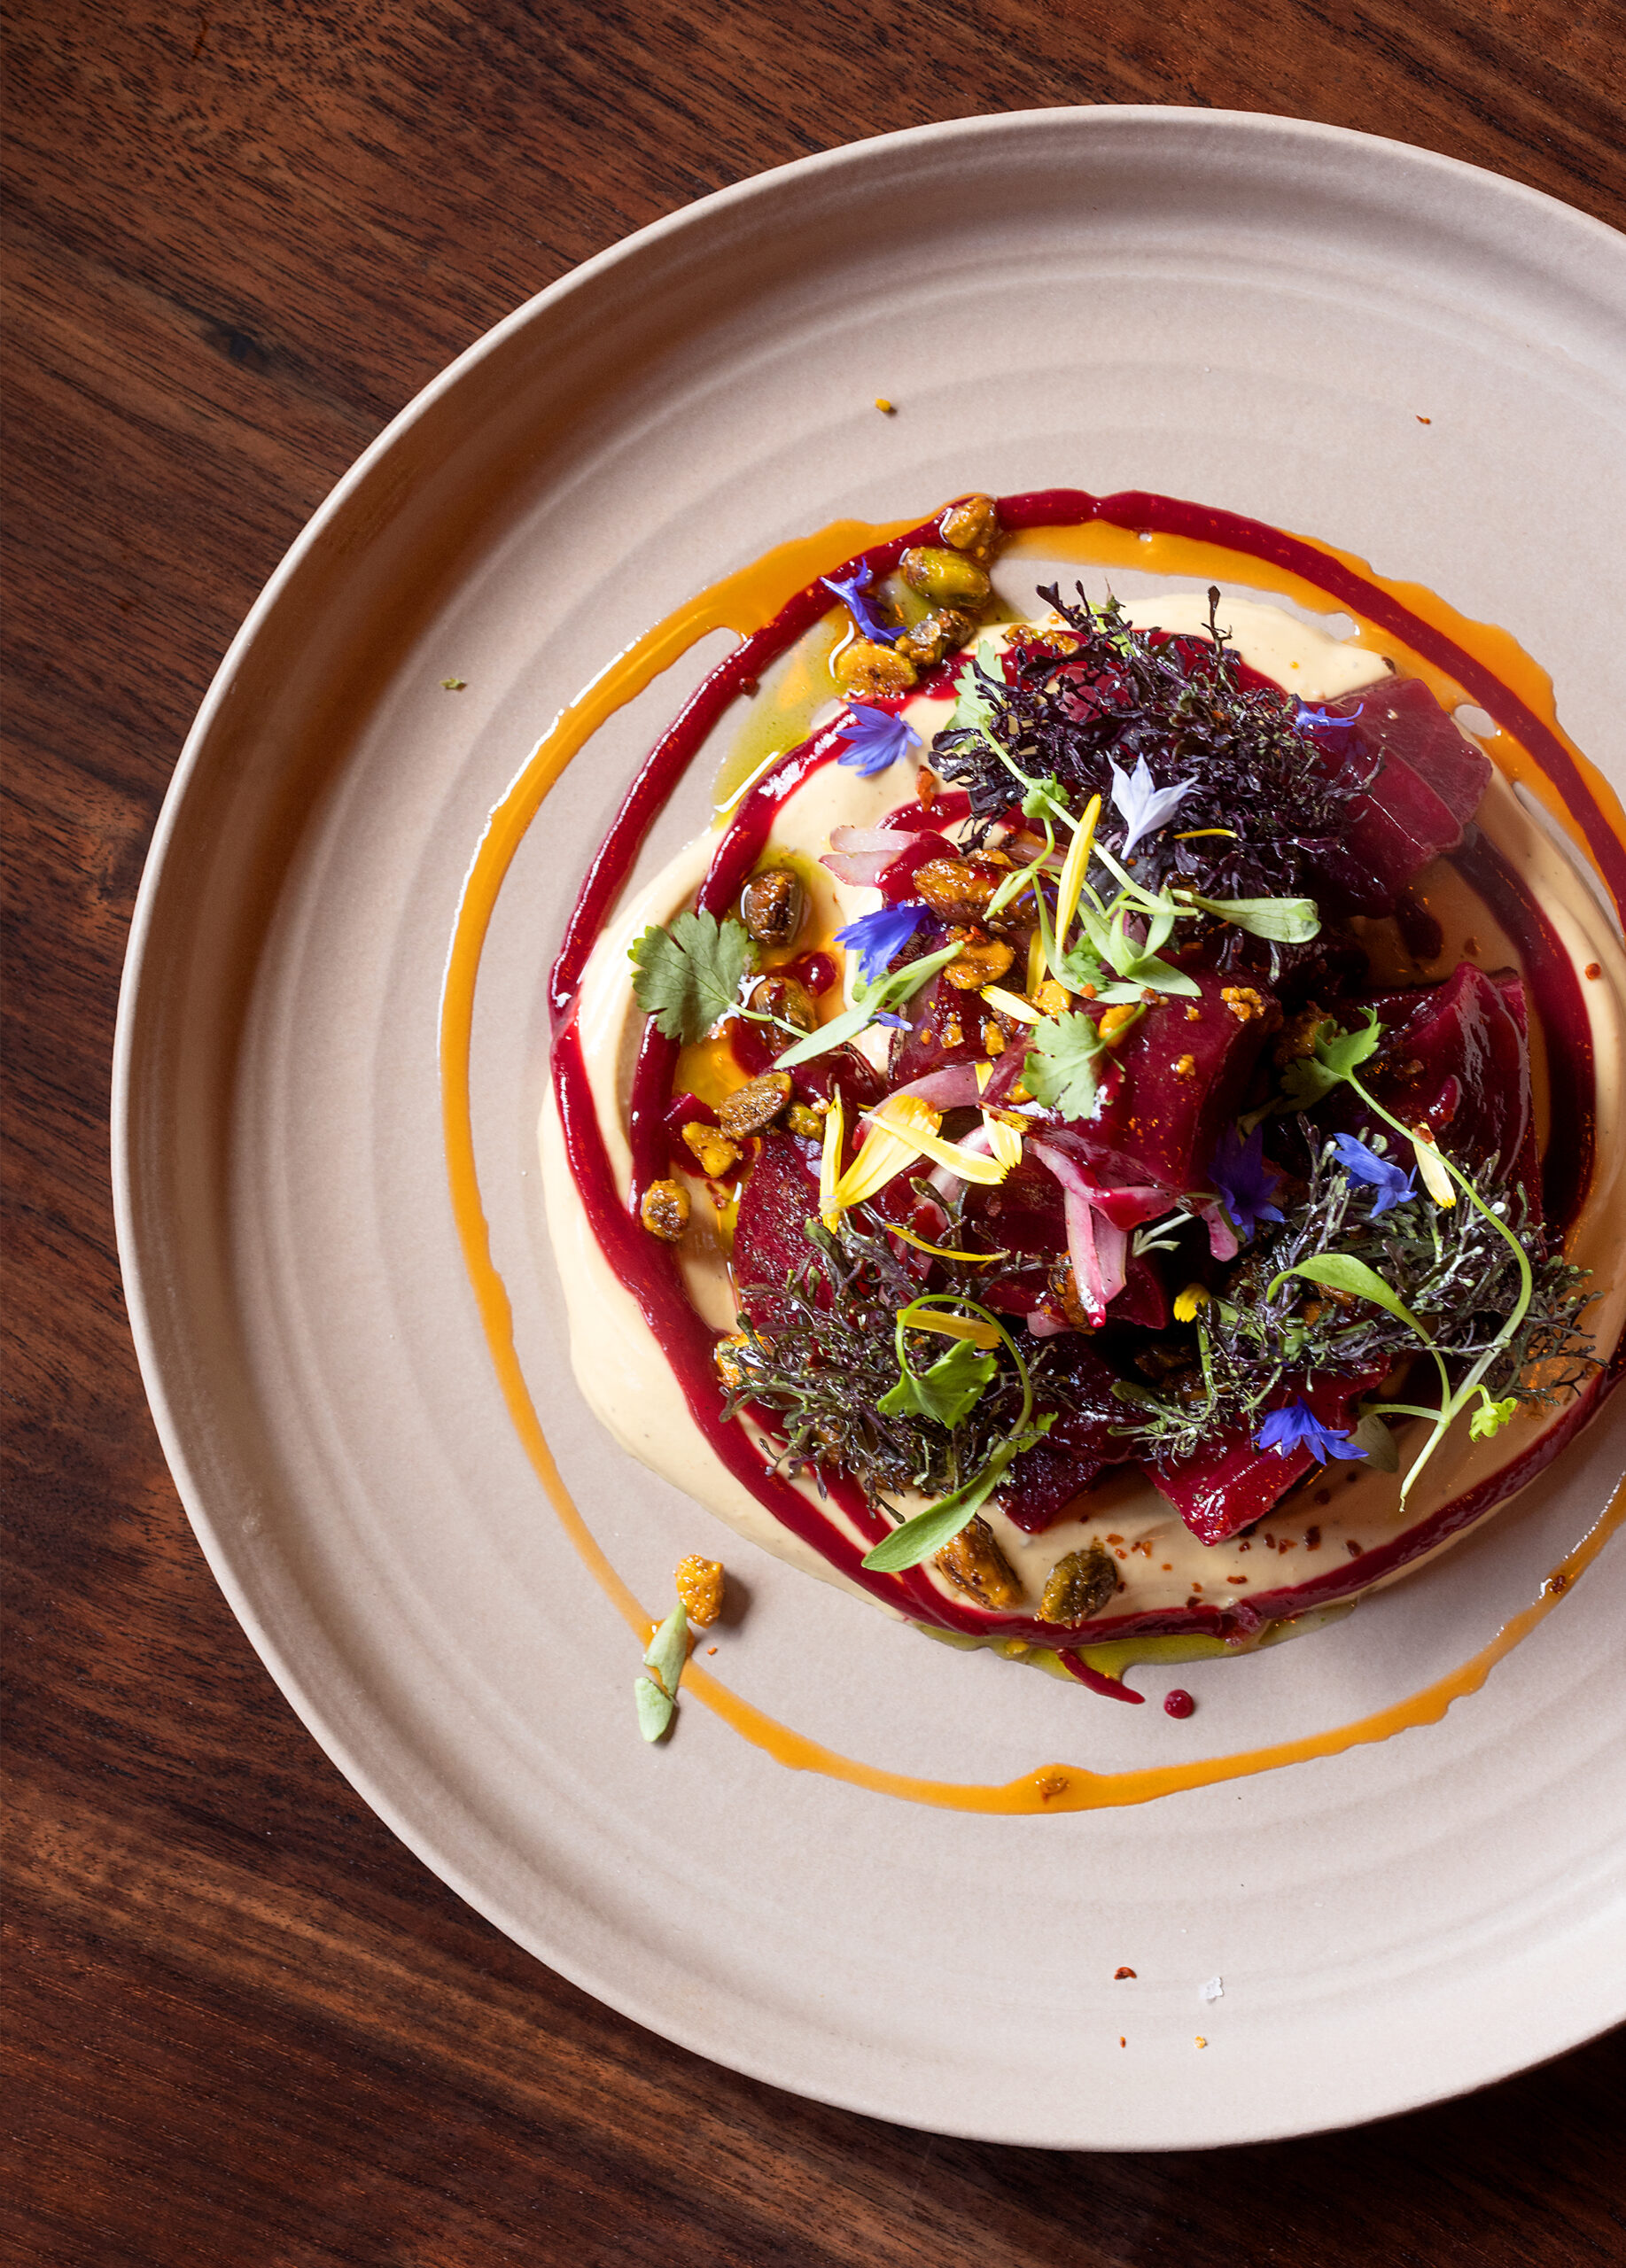 Fire Roasted Beets with caramelized yoghurt, pistachios and quick pickled onion from Goldfinch restaurant Wednesday, May 24, 2023, in Sebastopol. (John Burgess/The Press Democrat)